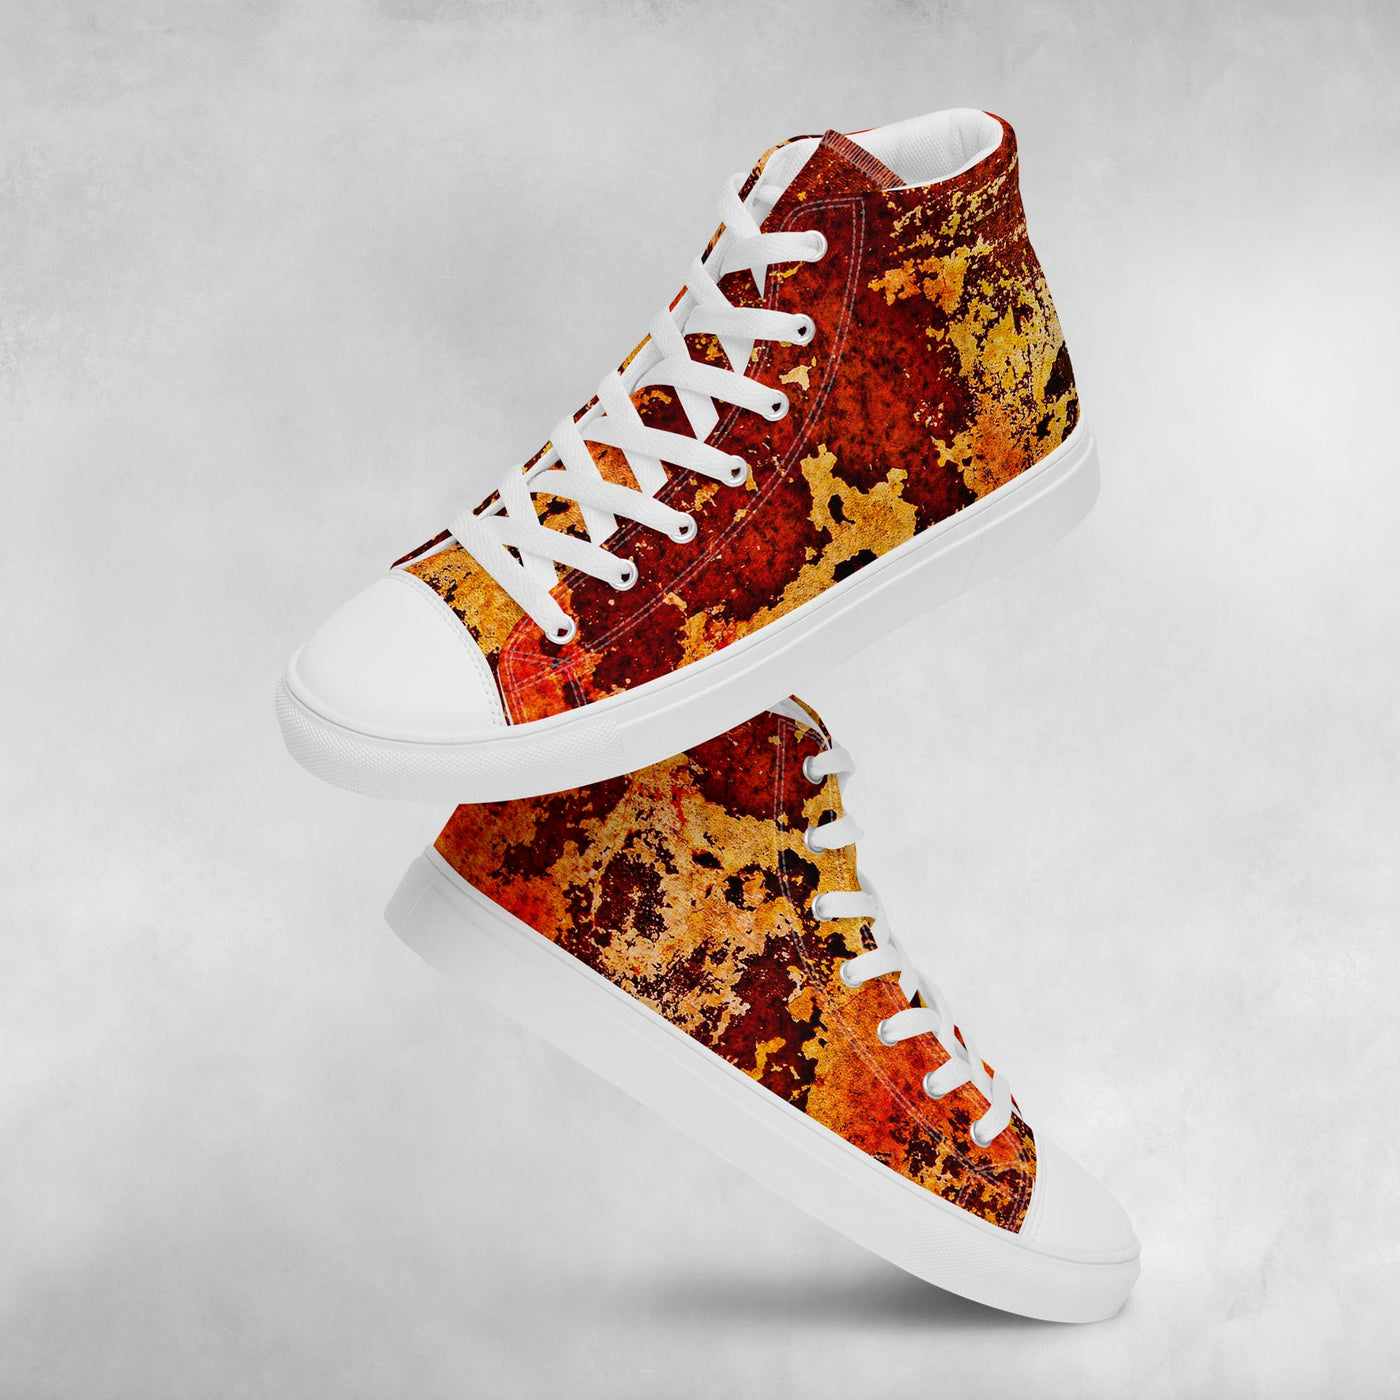 Rust - Women’s High Top Canvas Shoes